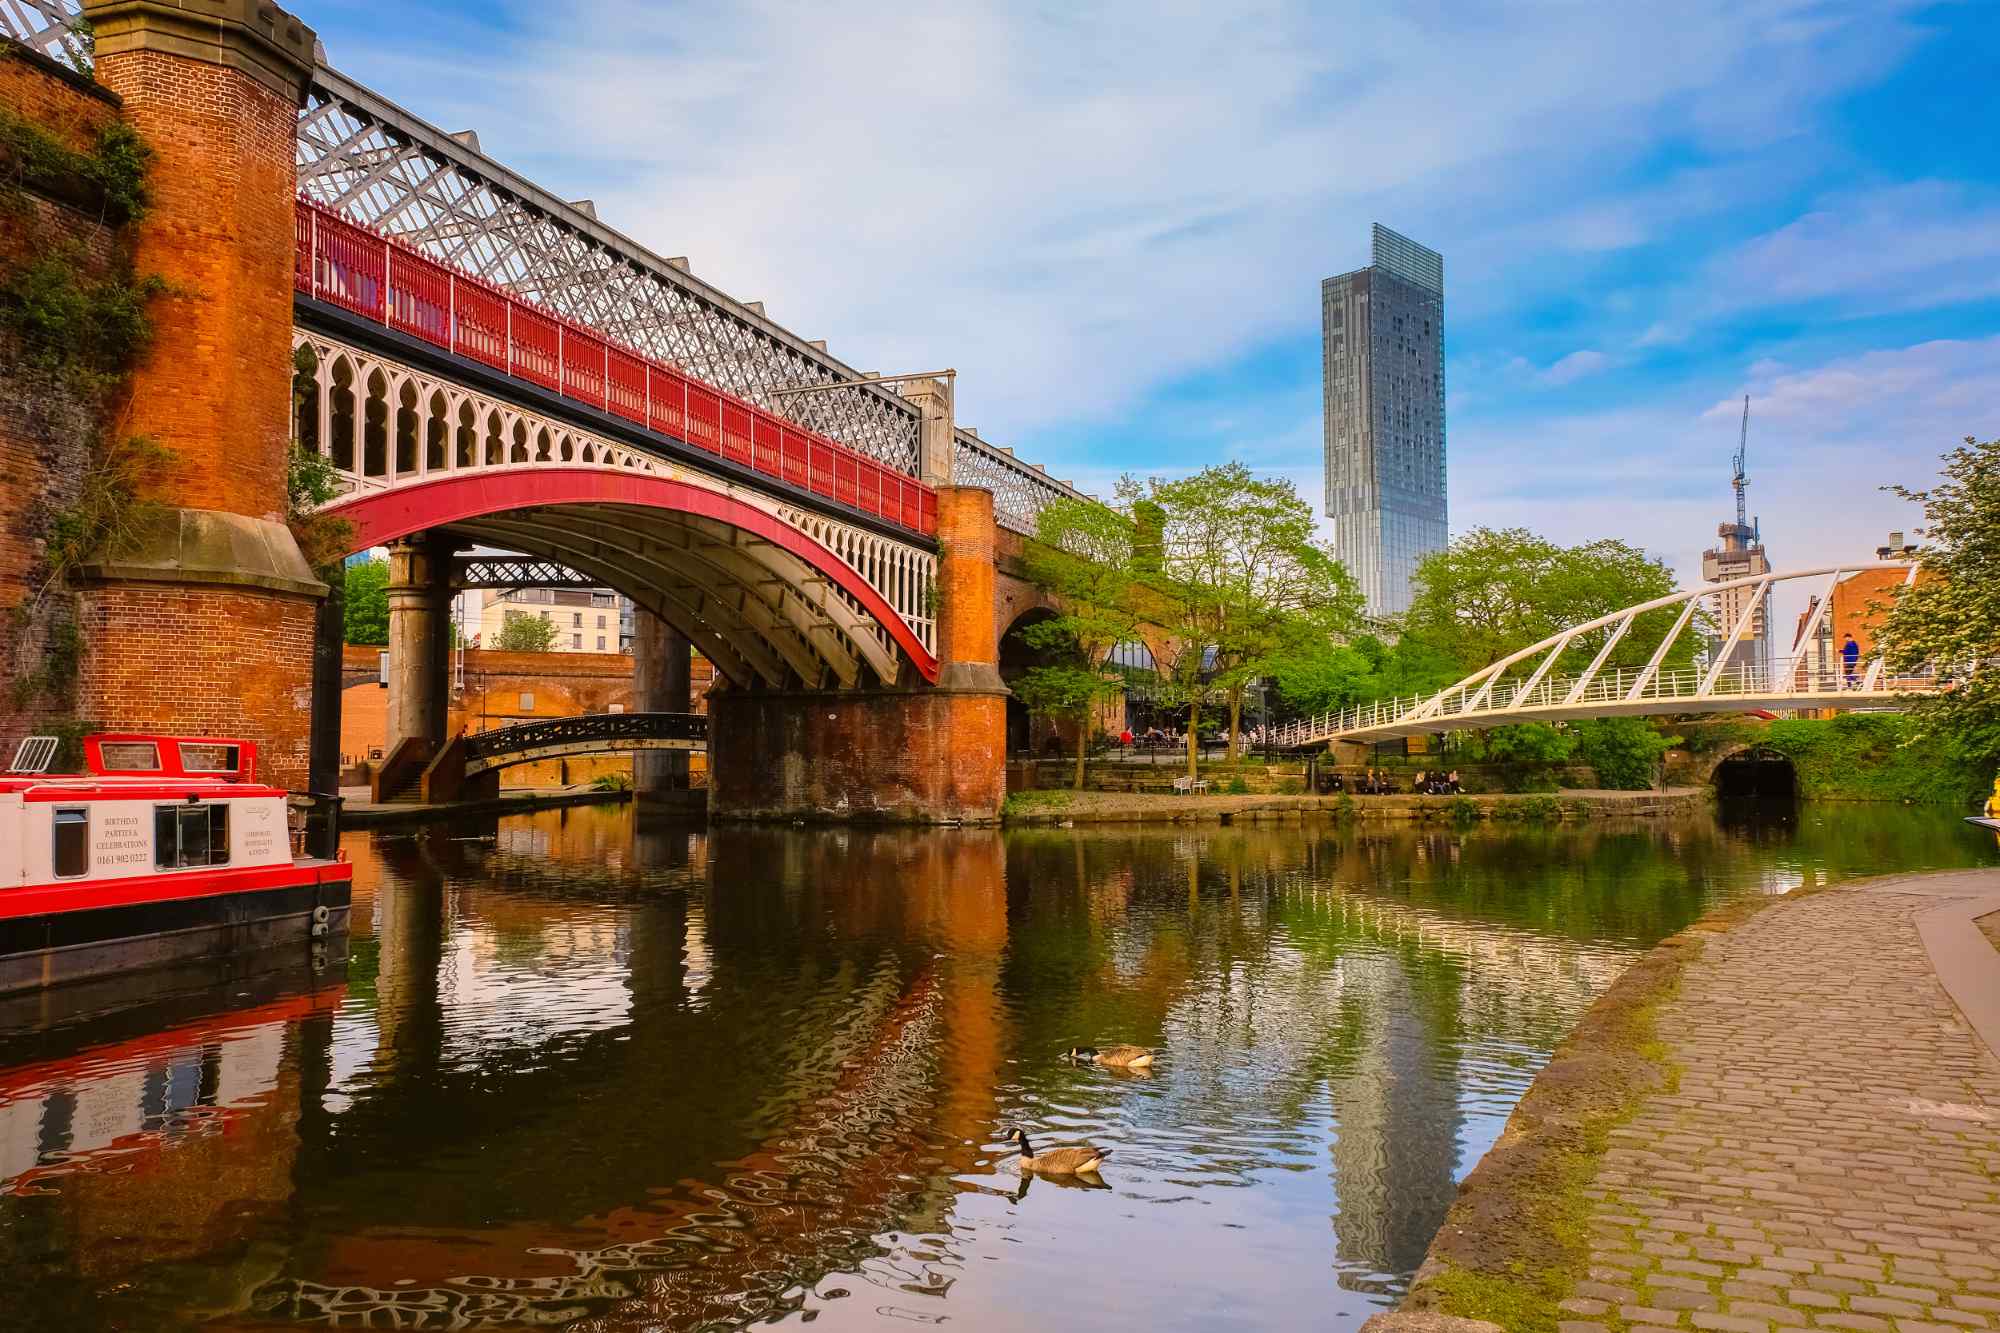 Castlefield canal in Manchester